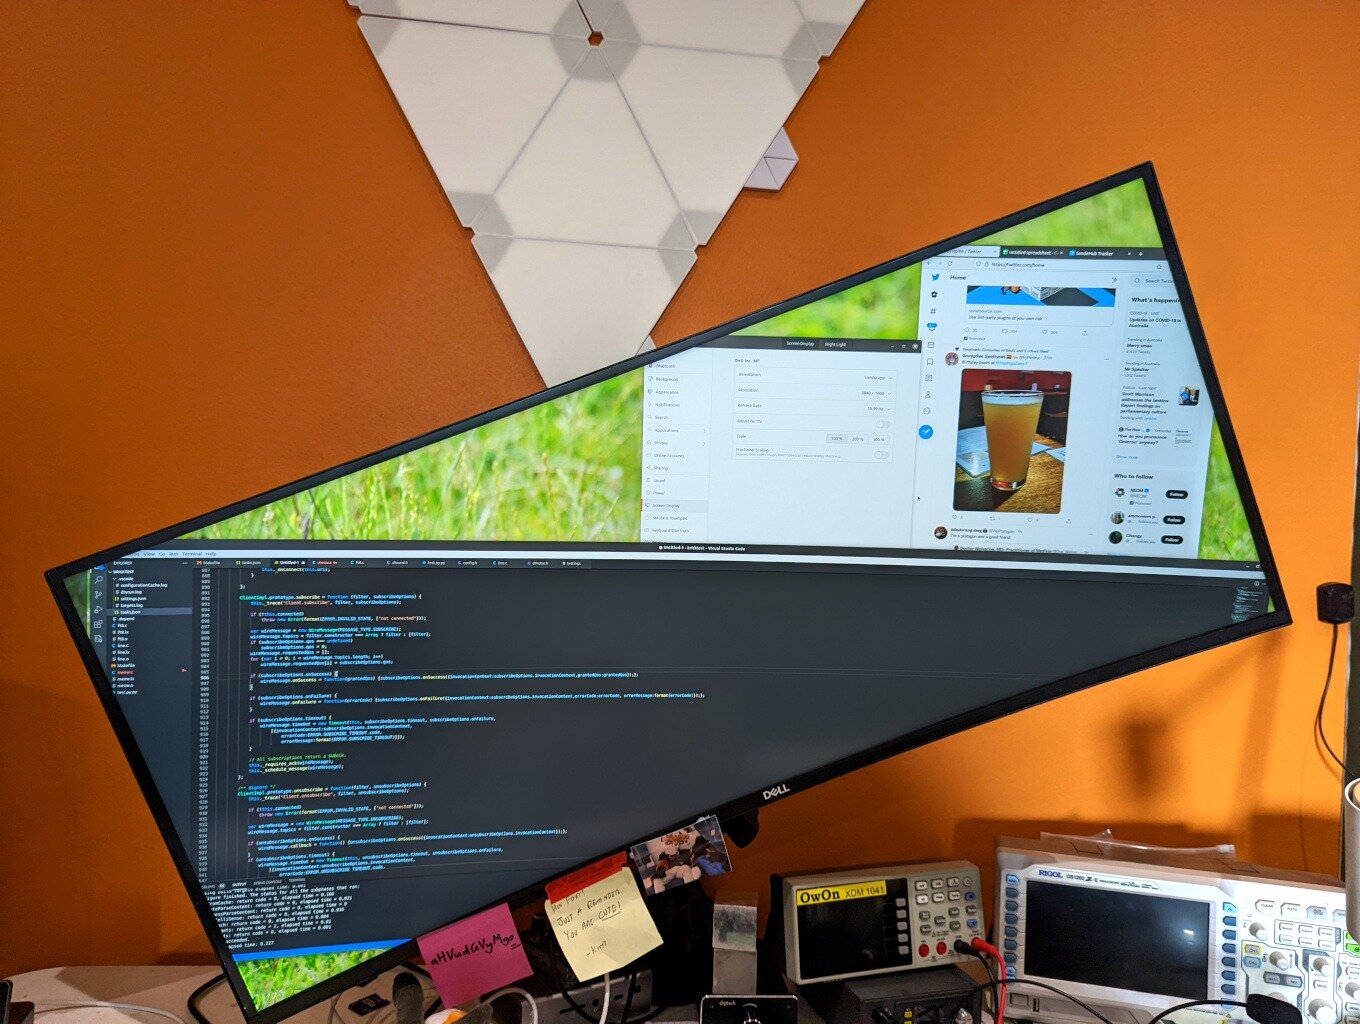 Linux is the only operating system that supports diagonal screen mode – Linux